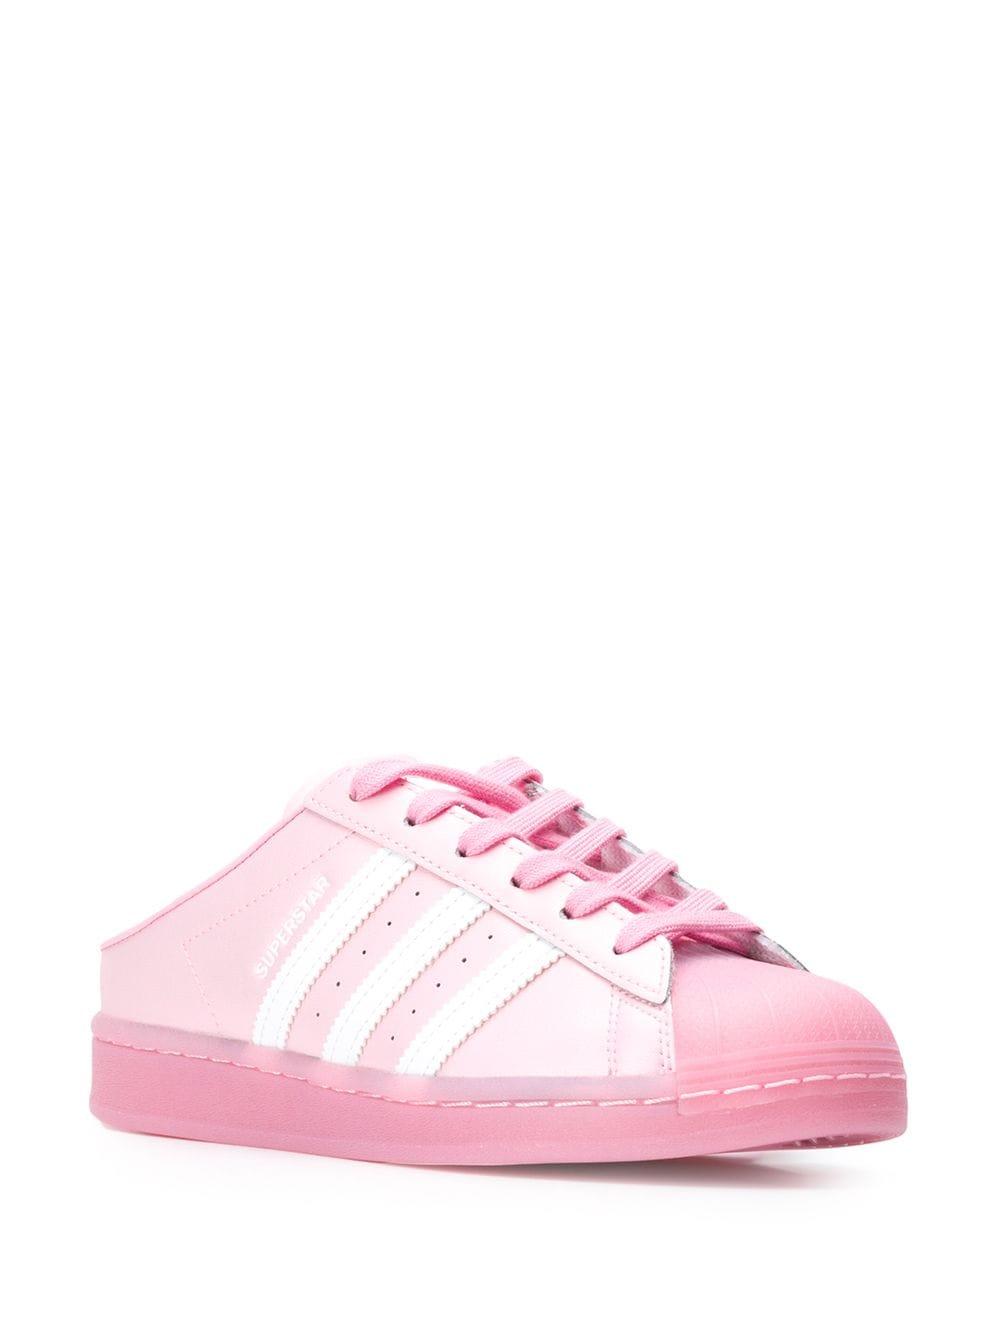 adidas Leather Superstar Mule Sneakers in Pink | Lyst